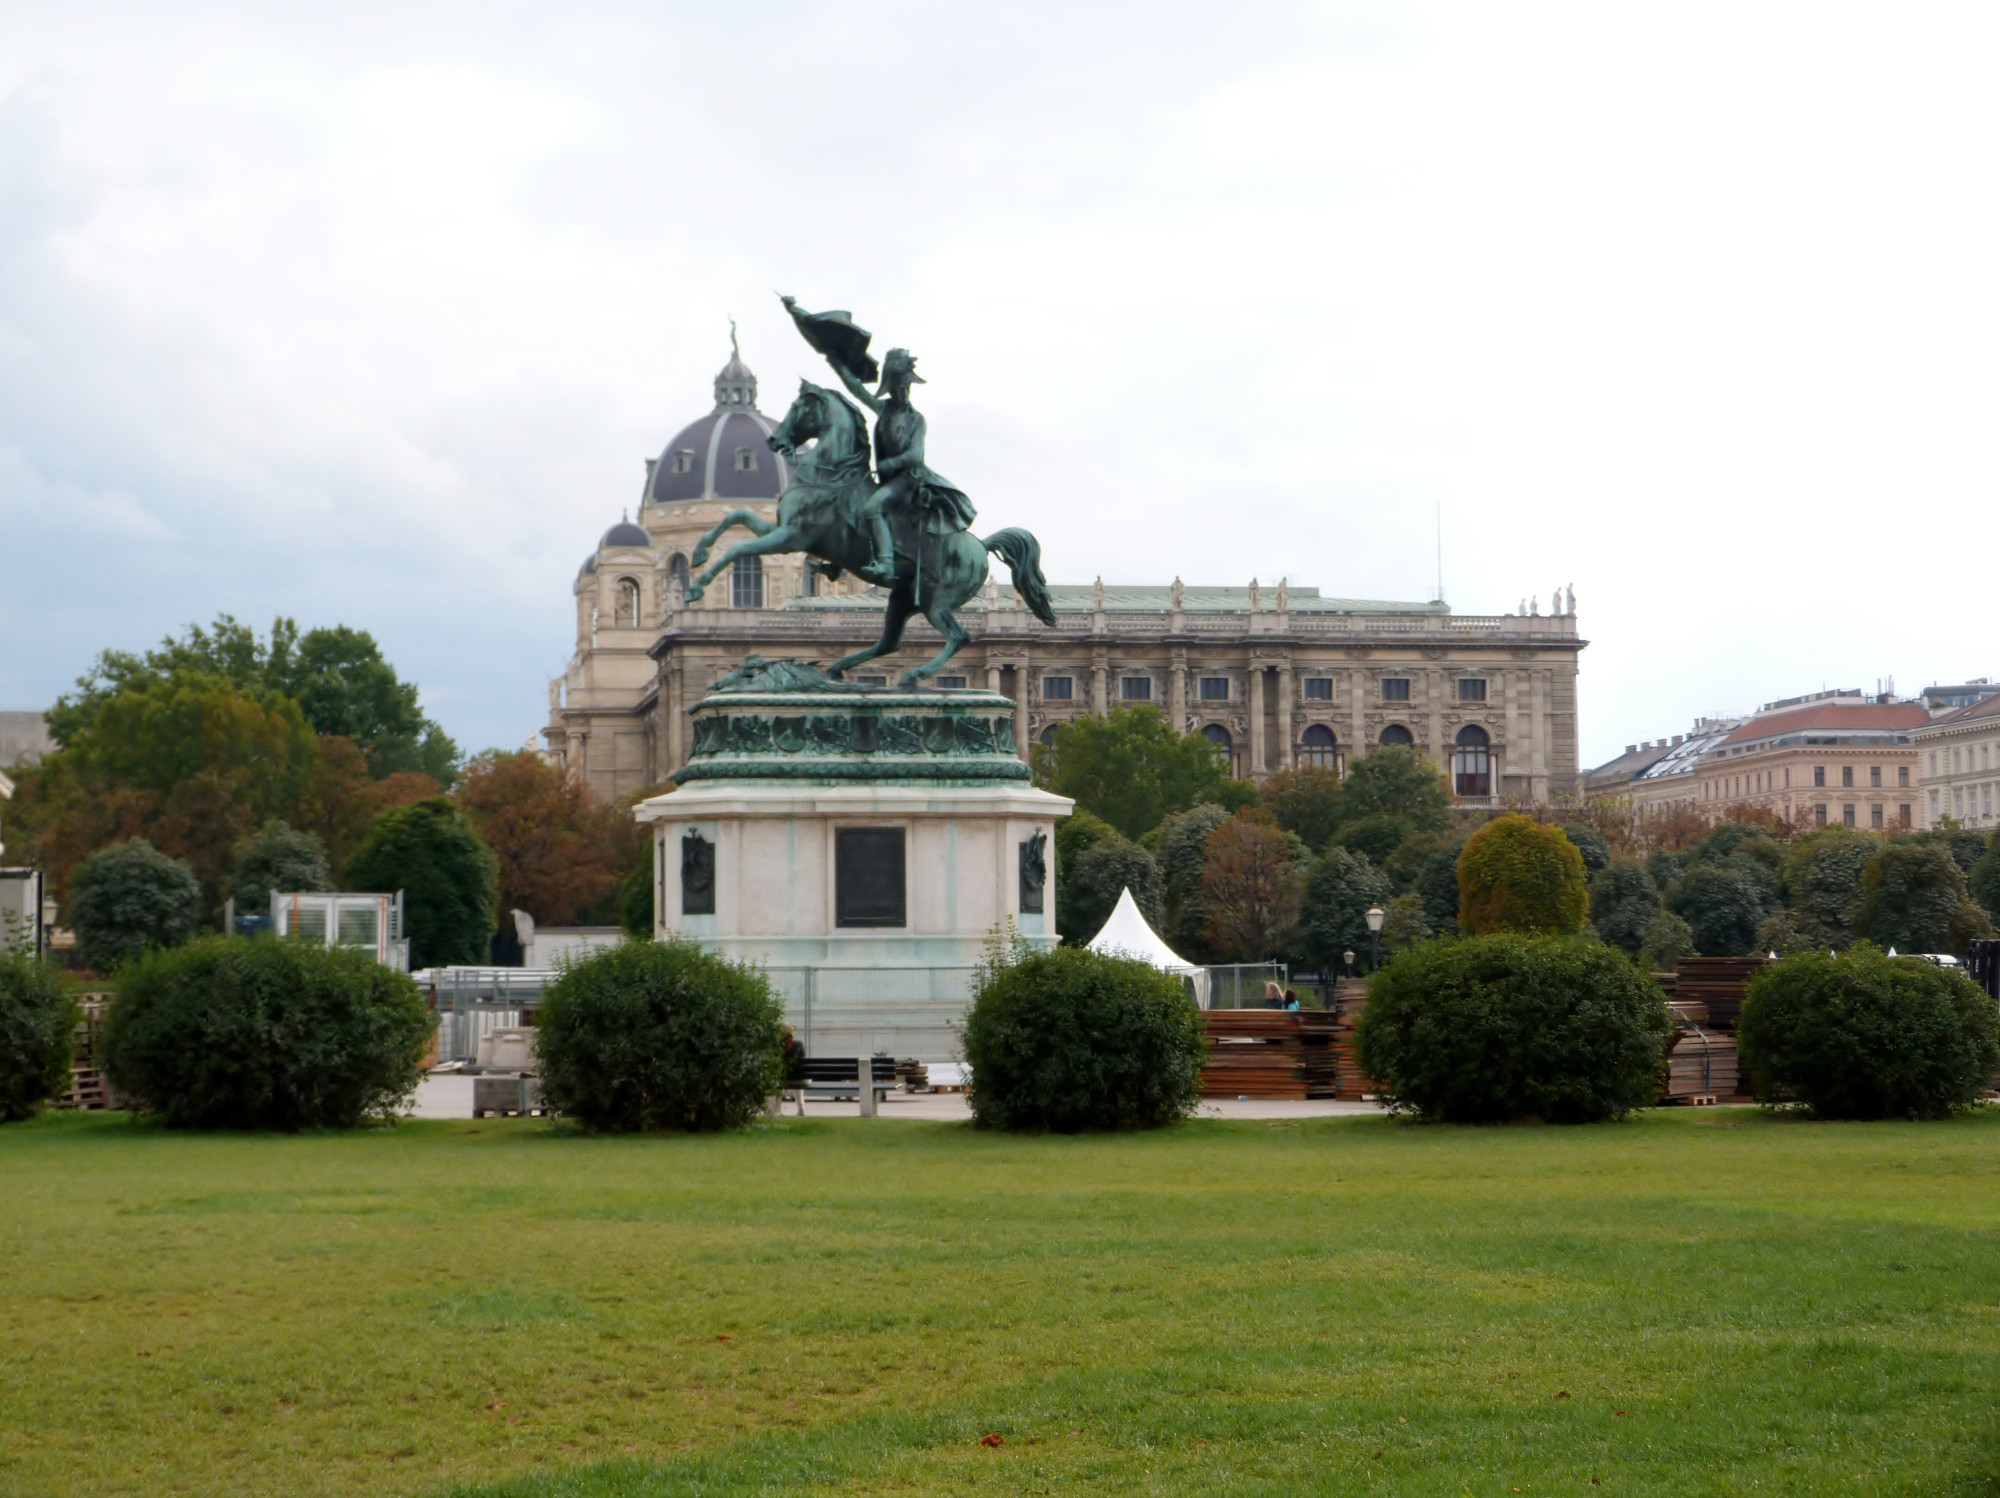 Statue of Archduke Charles on and Museum of Natural History Museum, 